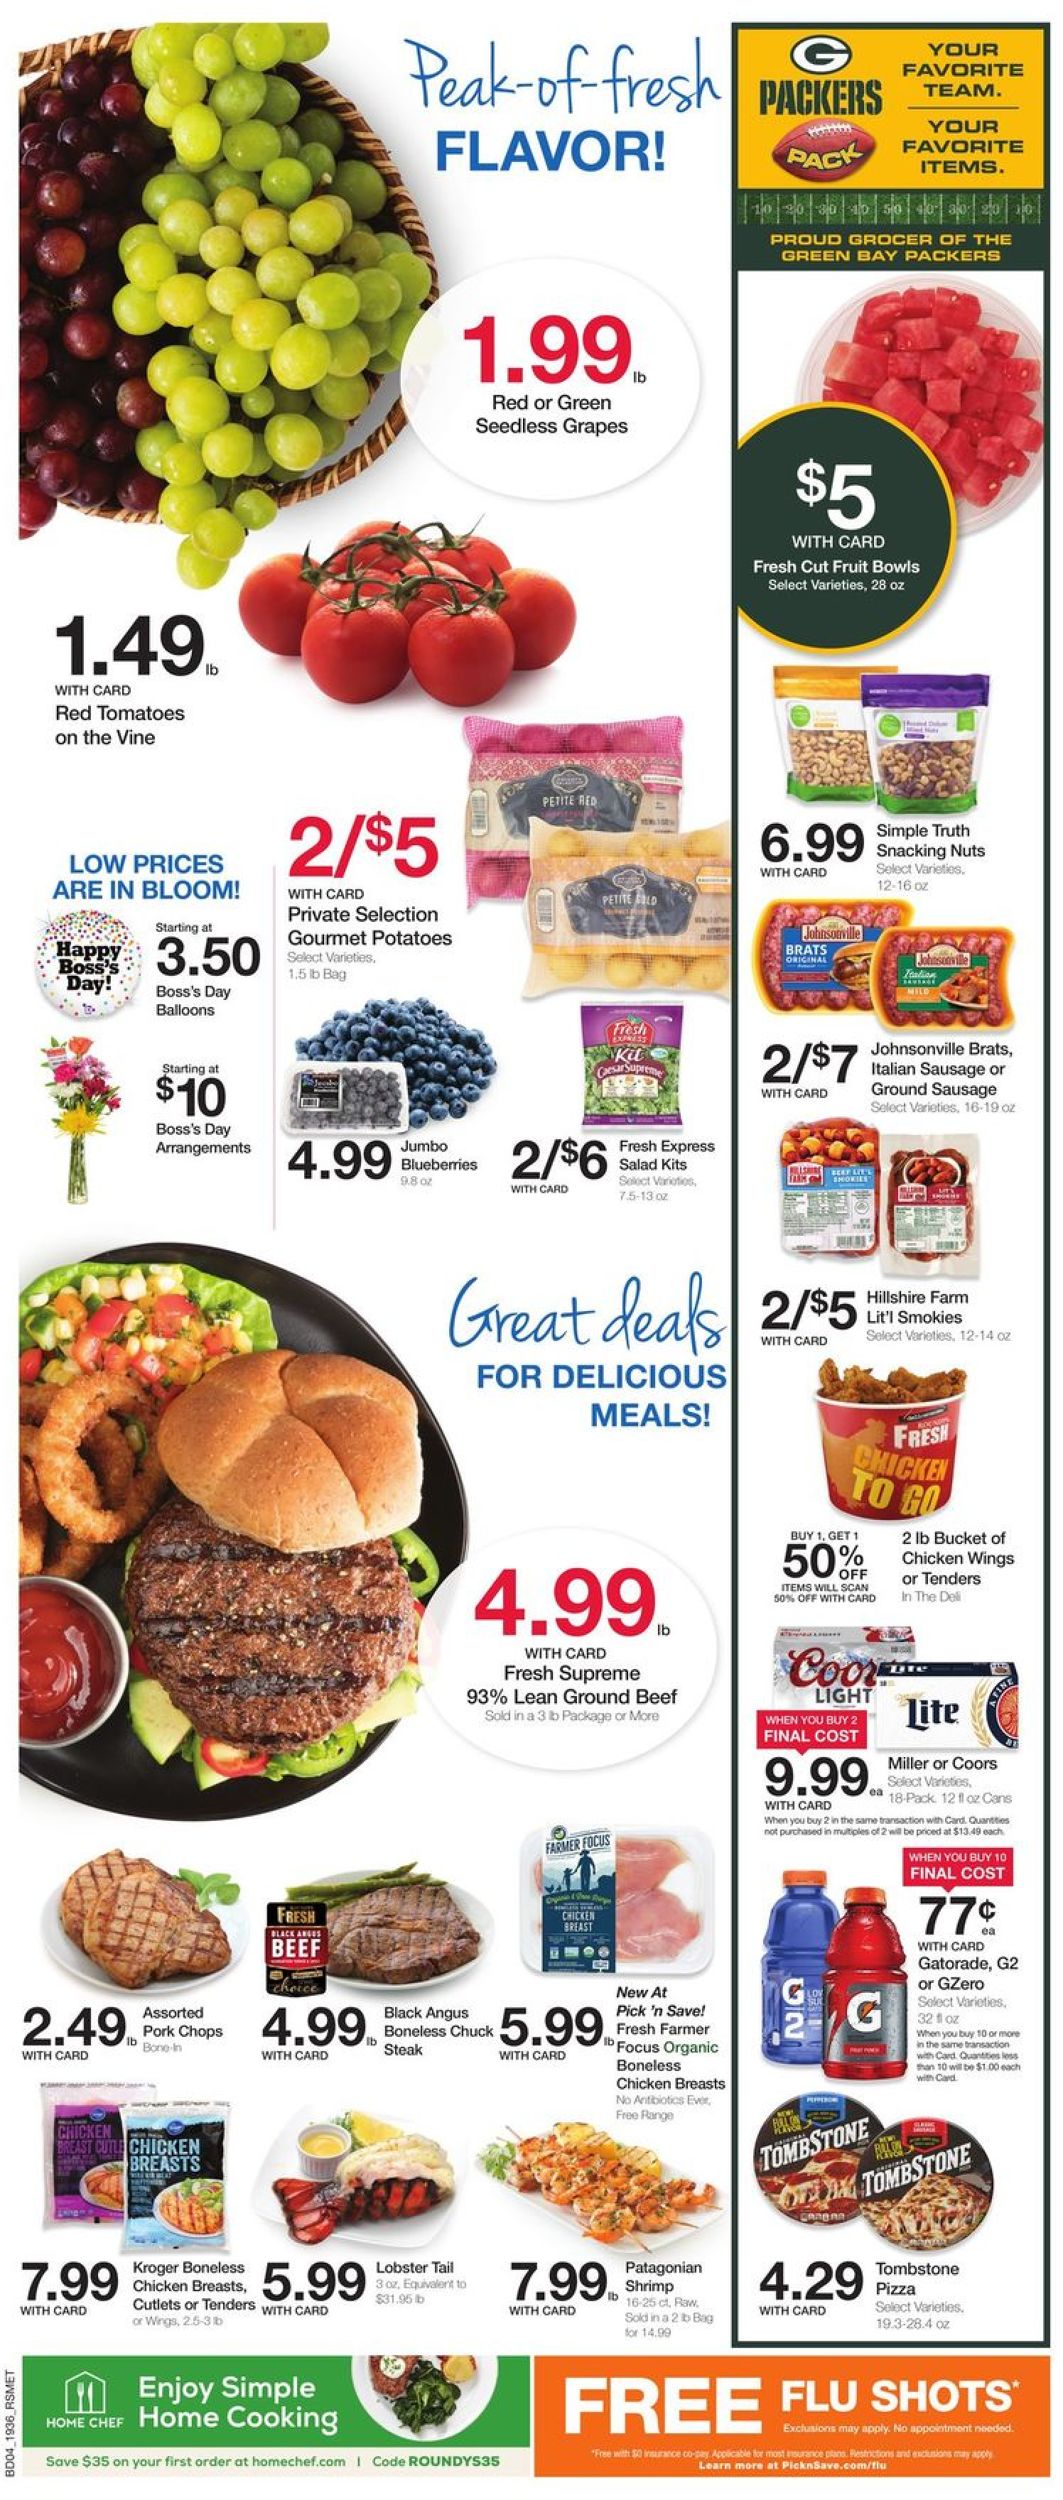 Catalogue Pick ‘n Save from 10/09/2019